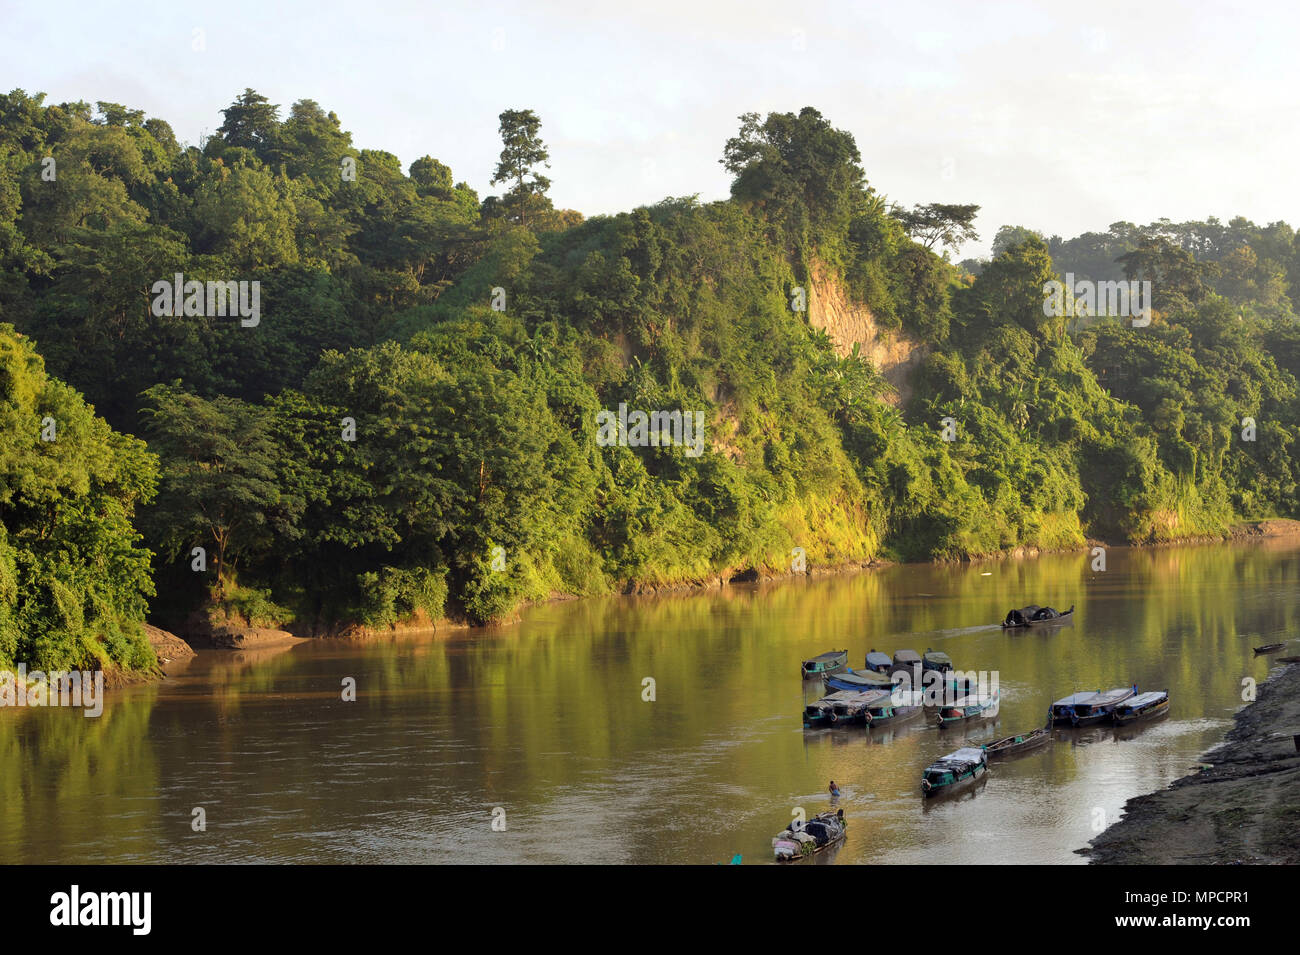 Bandarban, Bangladesh - September 30, 2010: The view of the Sangu River in Bandarban.  Bandarban is regarded as one of the most attractive travel dest Stock Photo